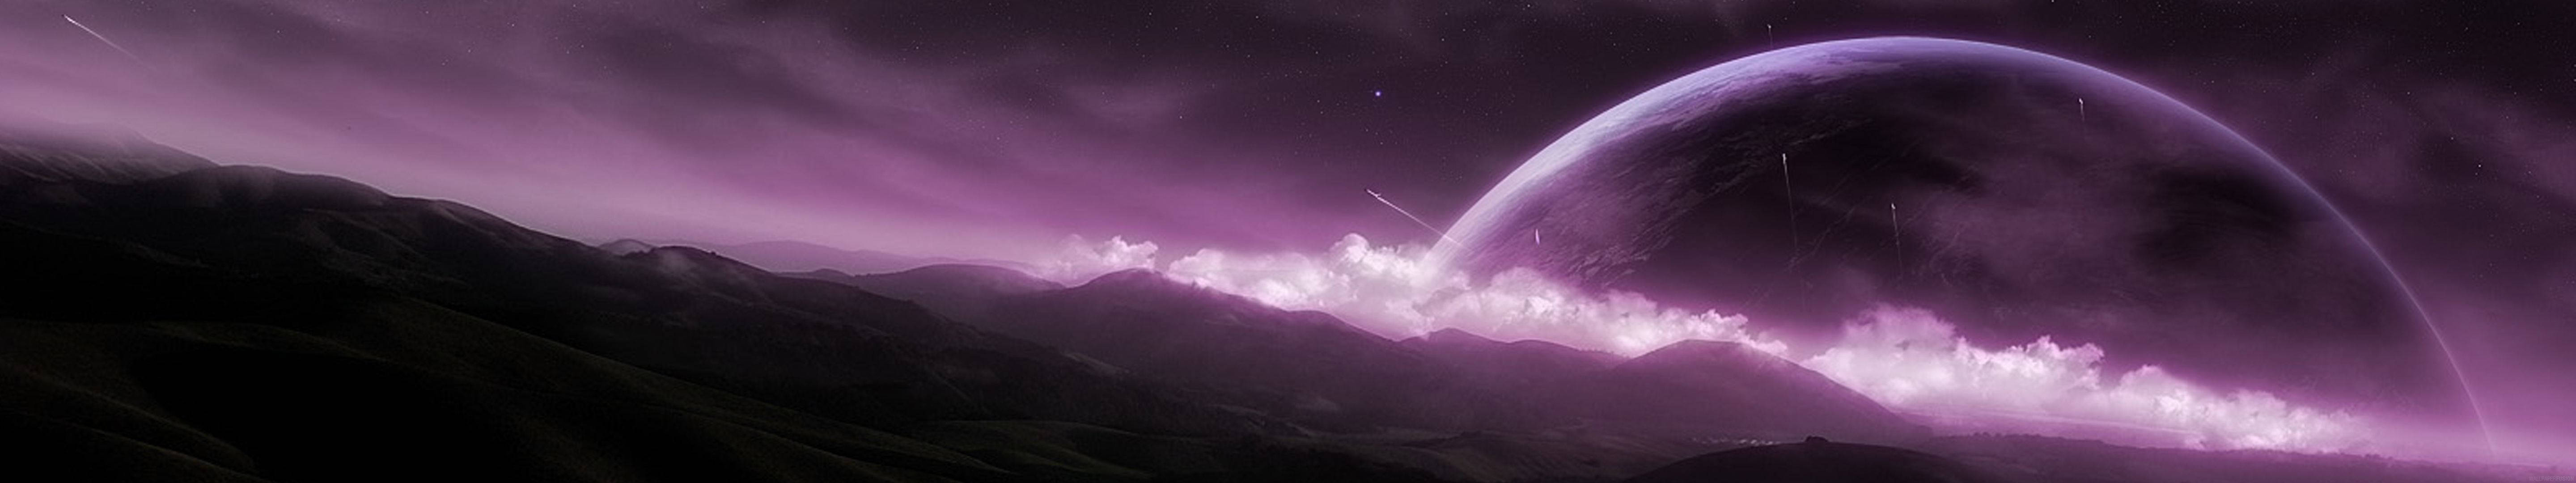 A stunning view of a giant purple Earth over mountains Wallpaper